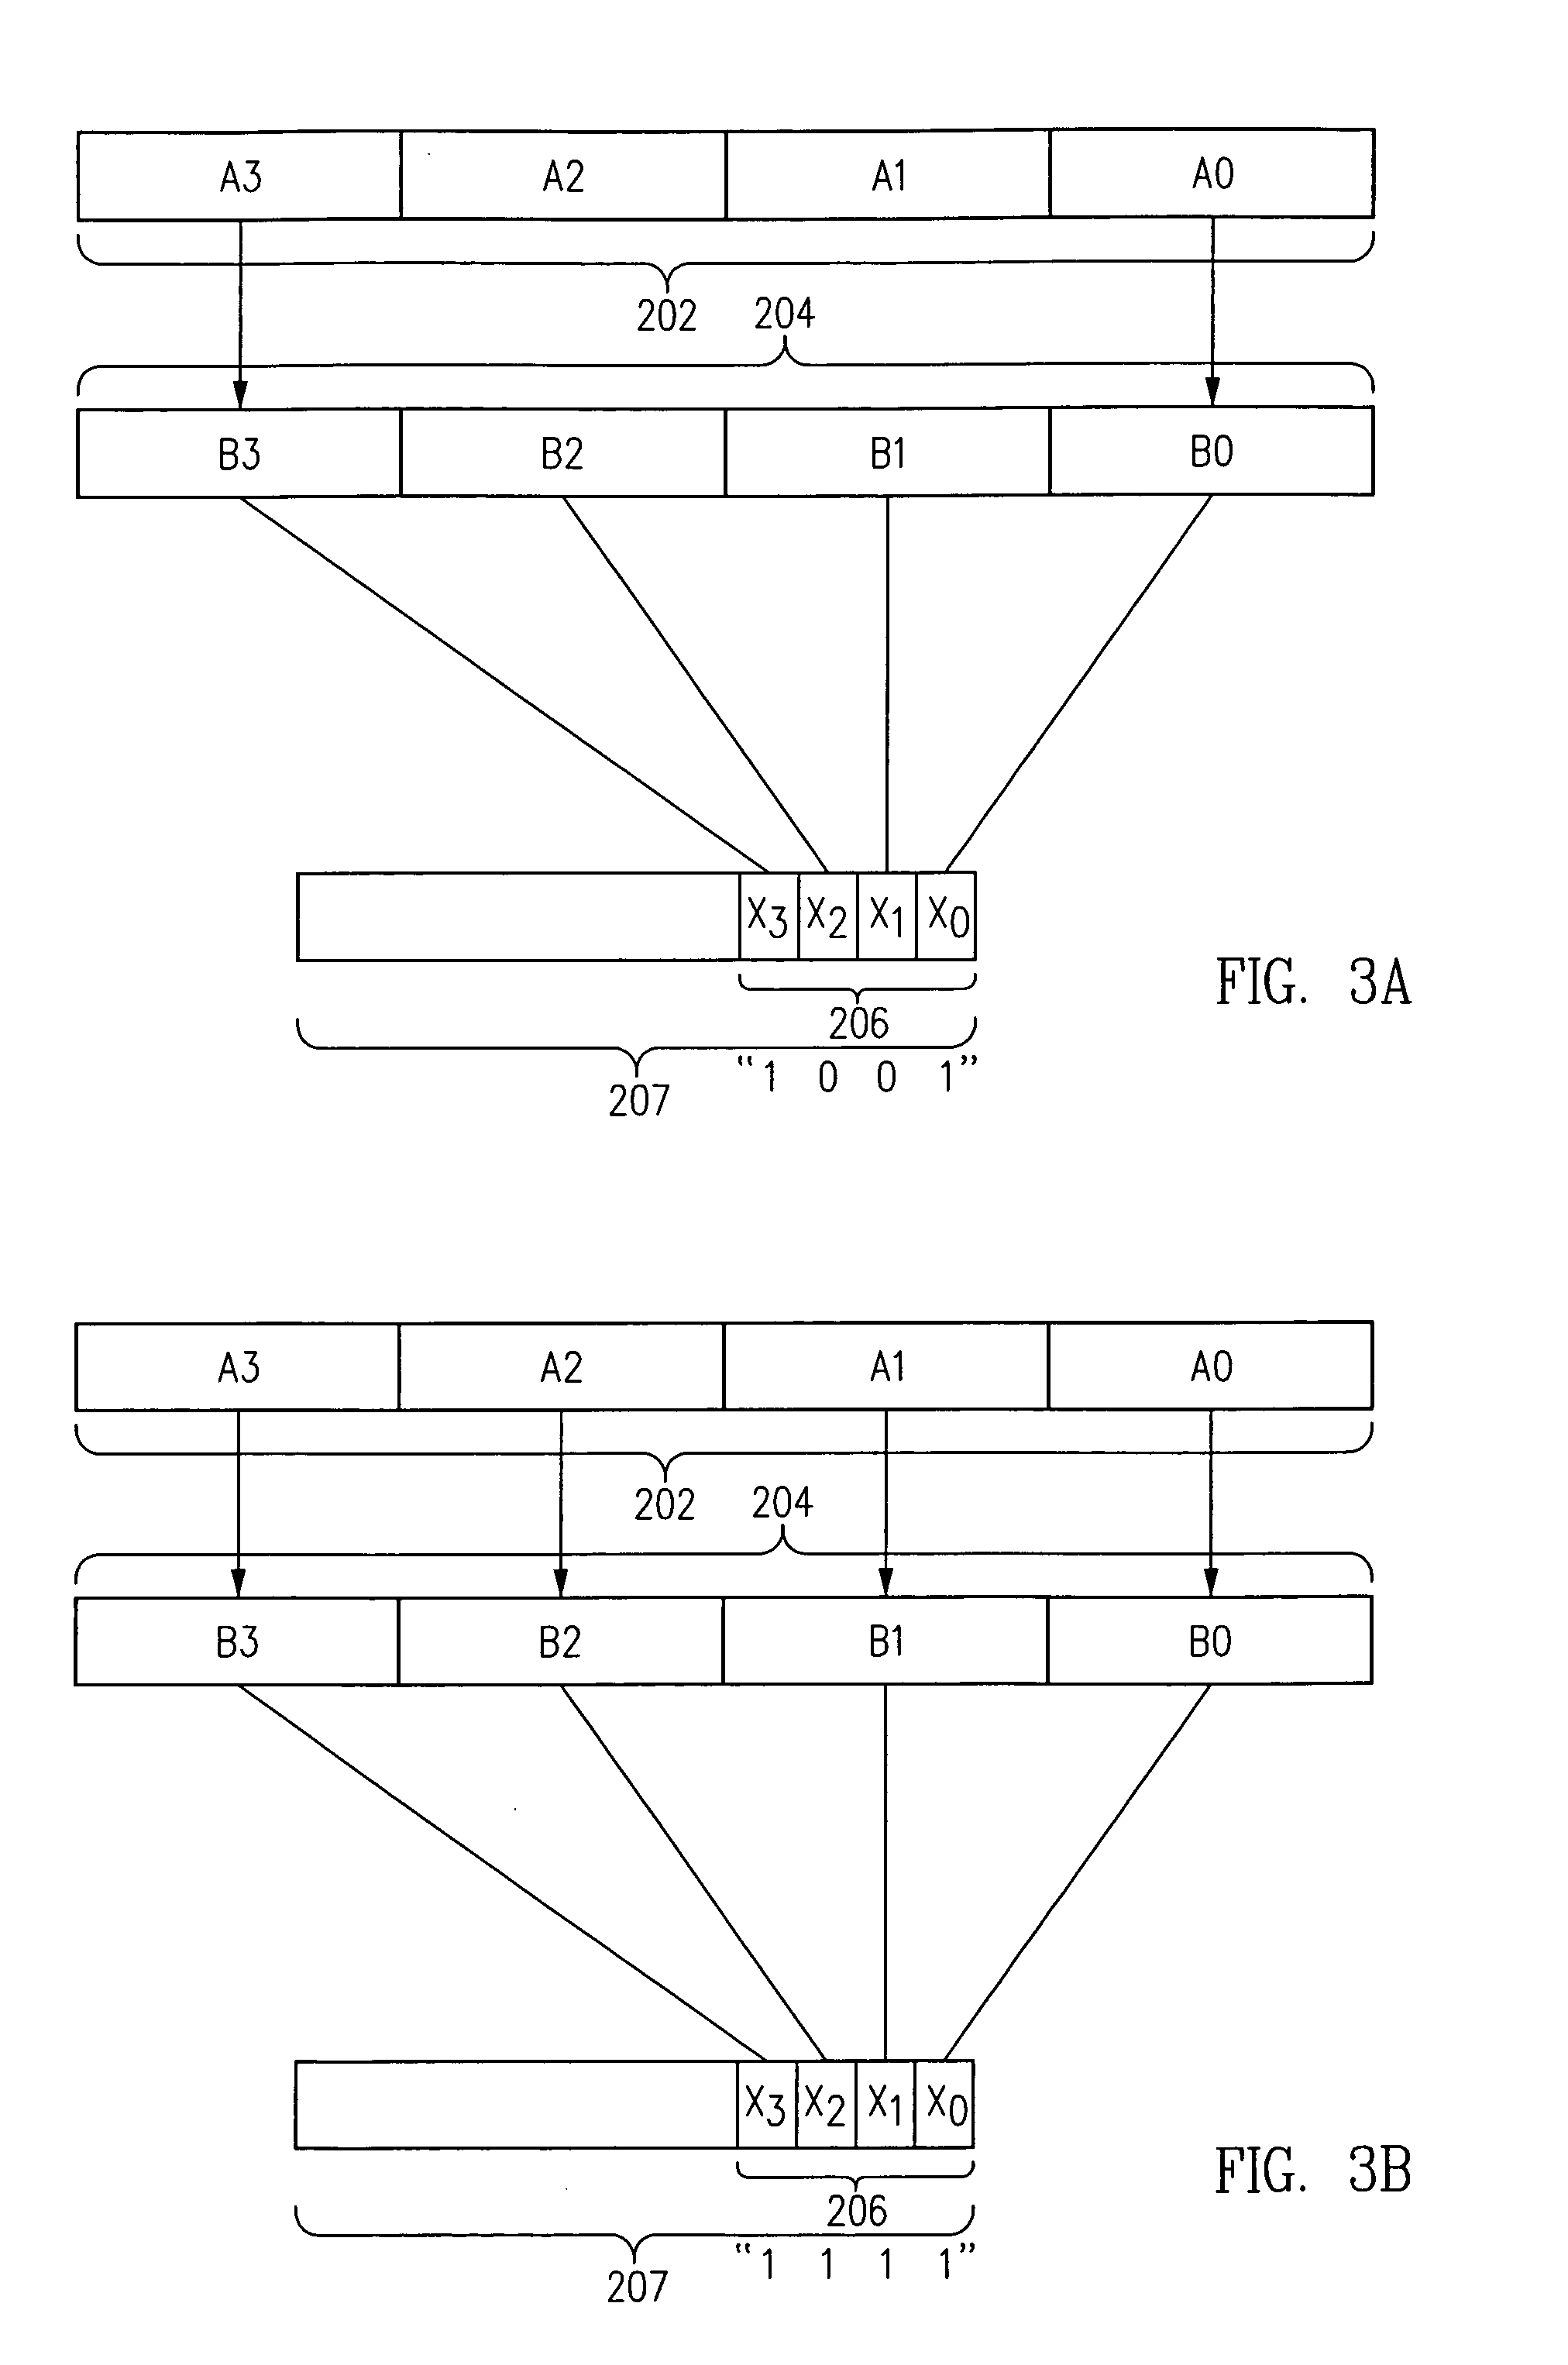 Method for rapid interpretation of results returned by a parallel compare instruction